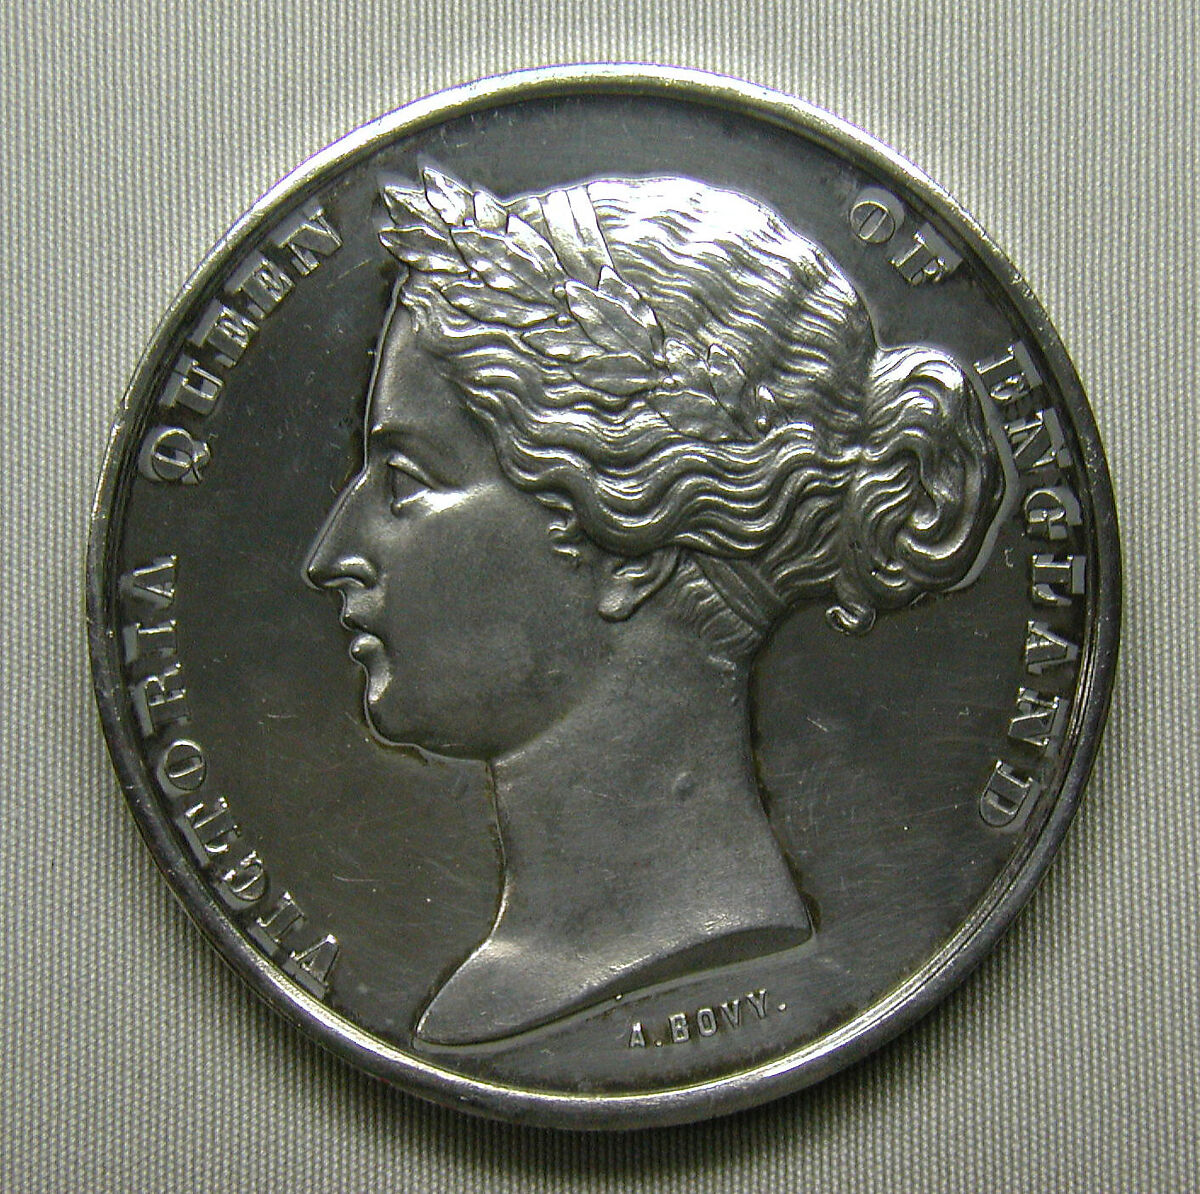 Universal Exhibition of London, 1862, Medalist: Jean-François-Antoine Bovy (French, 1795–1877), Silver, British 